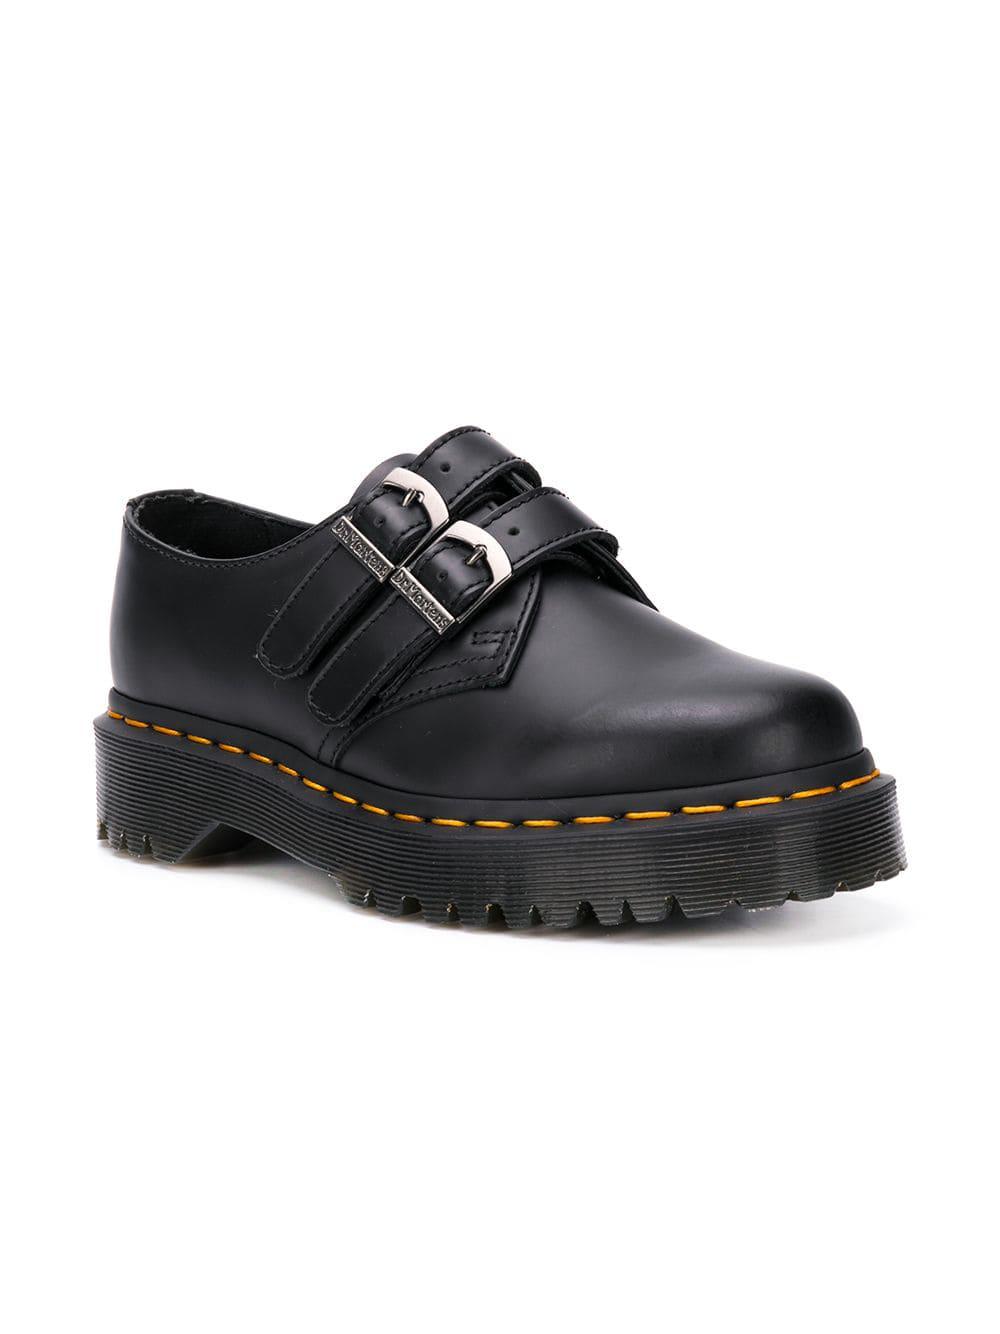 Dr. Martens Double Buckle Shoes in Black | Lyst